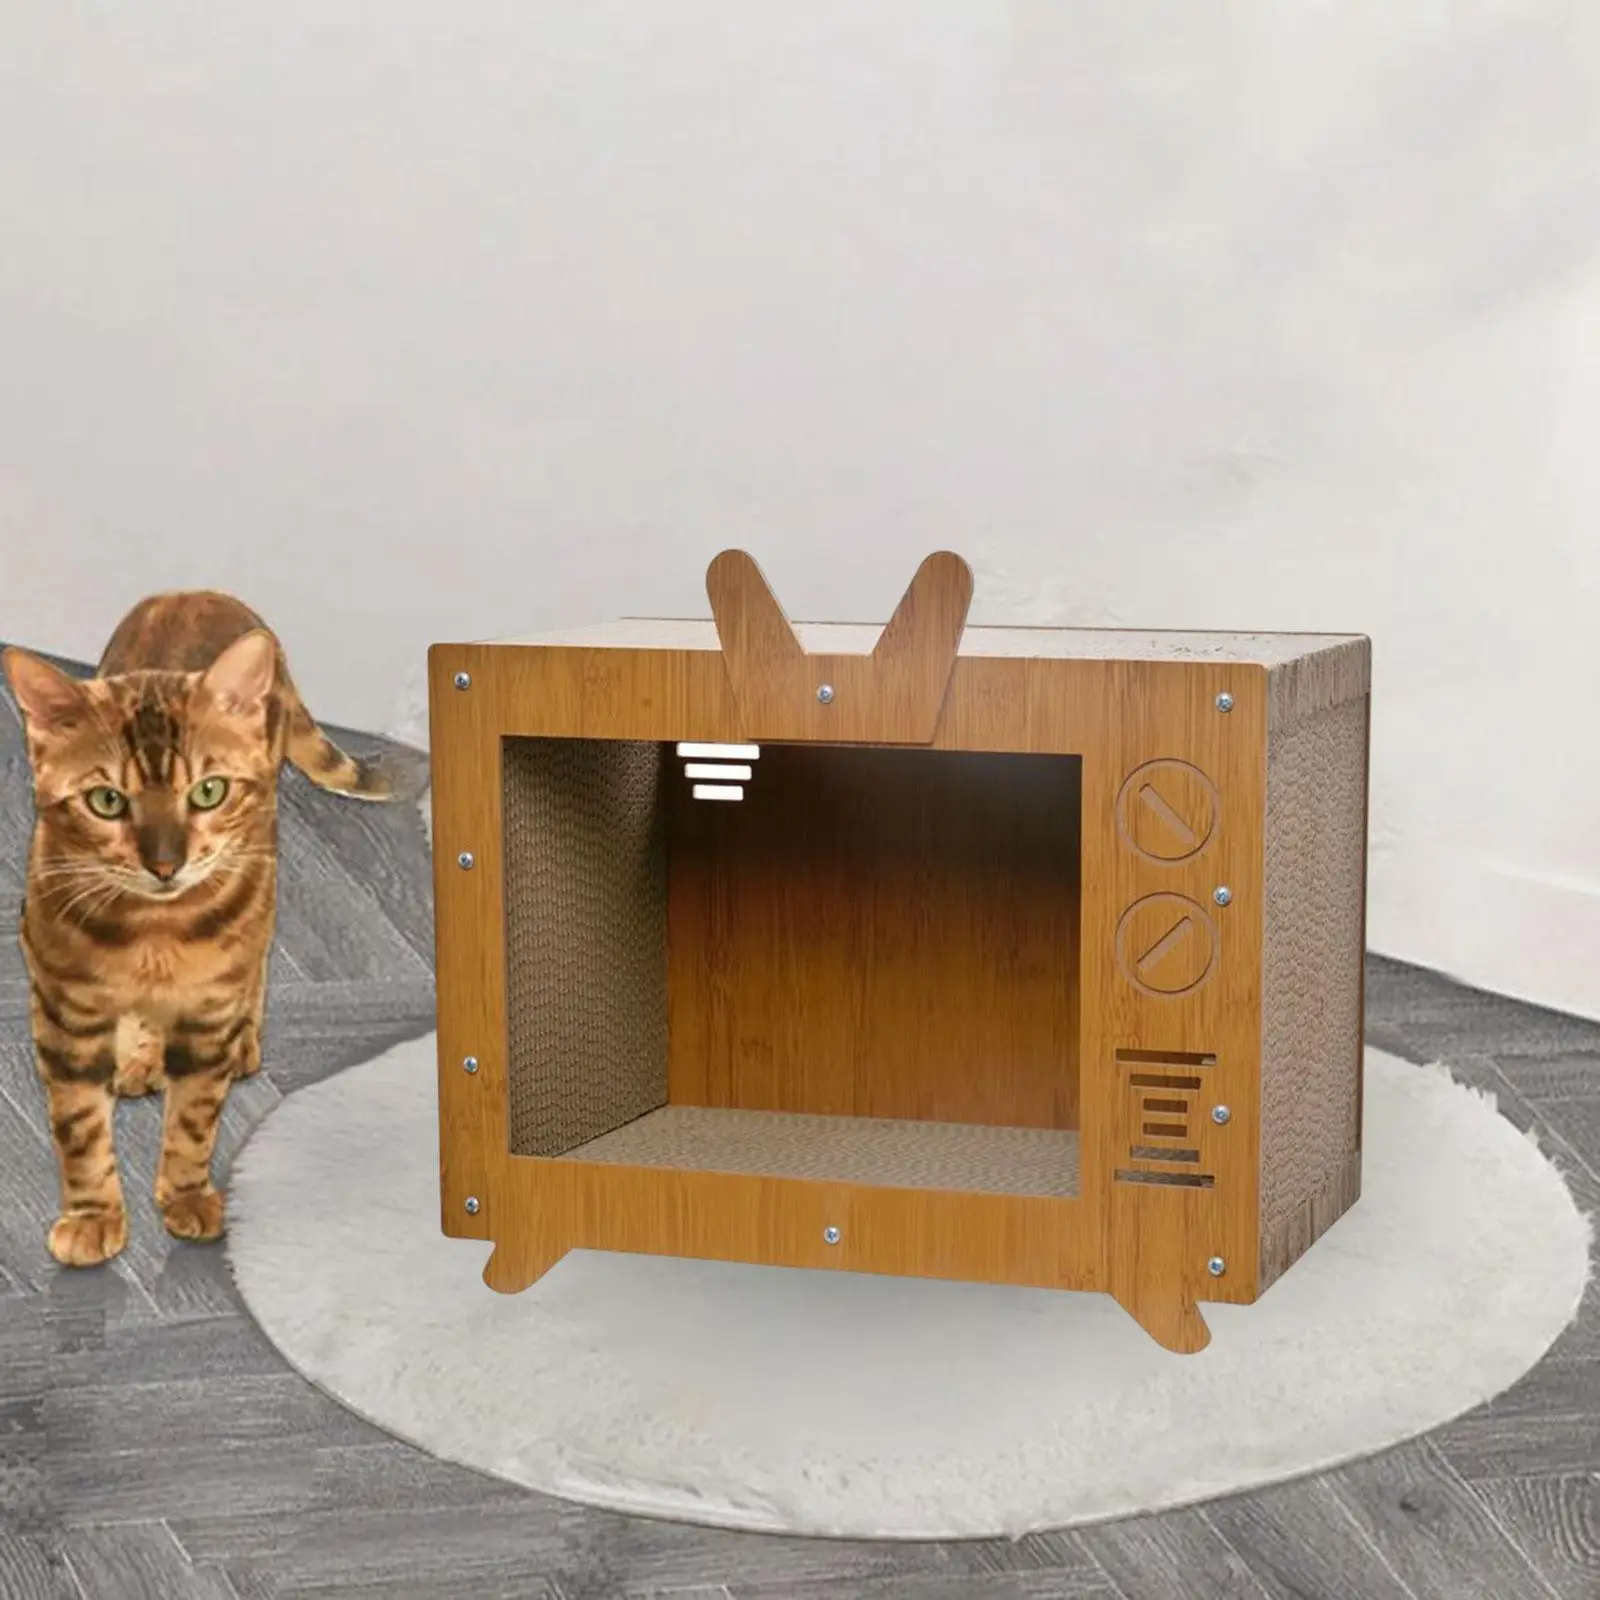 TV Shaped Cat Scratcher Box Lounge Bed Pet Supplies for Indoor Cats Kitten Place to Relax Comfortable to Lie On Wear Resistant